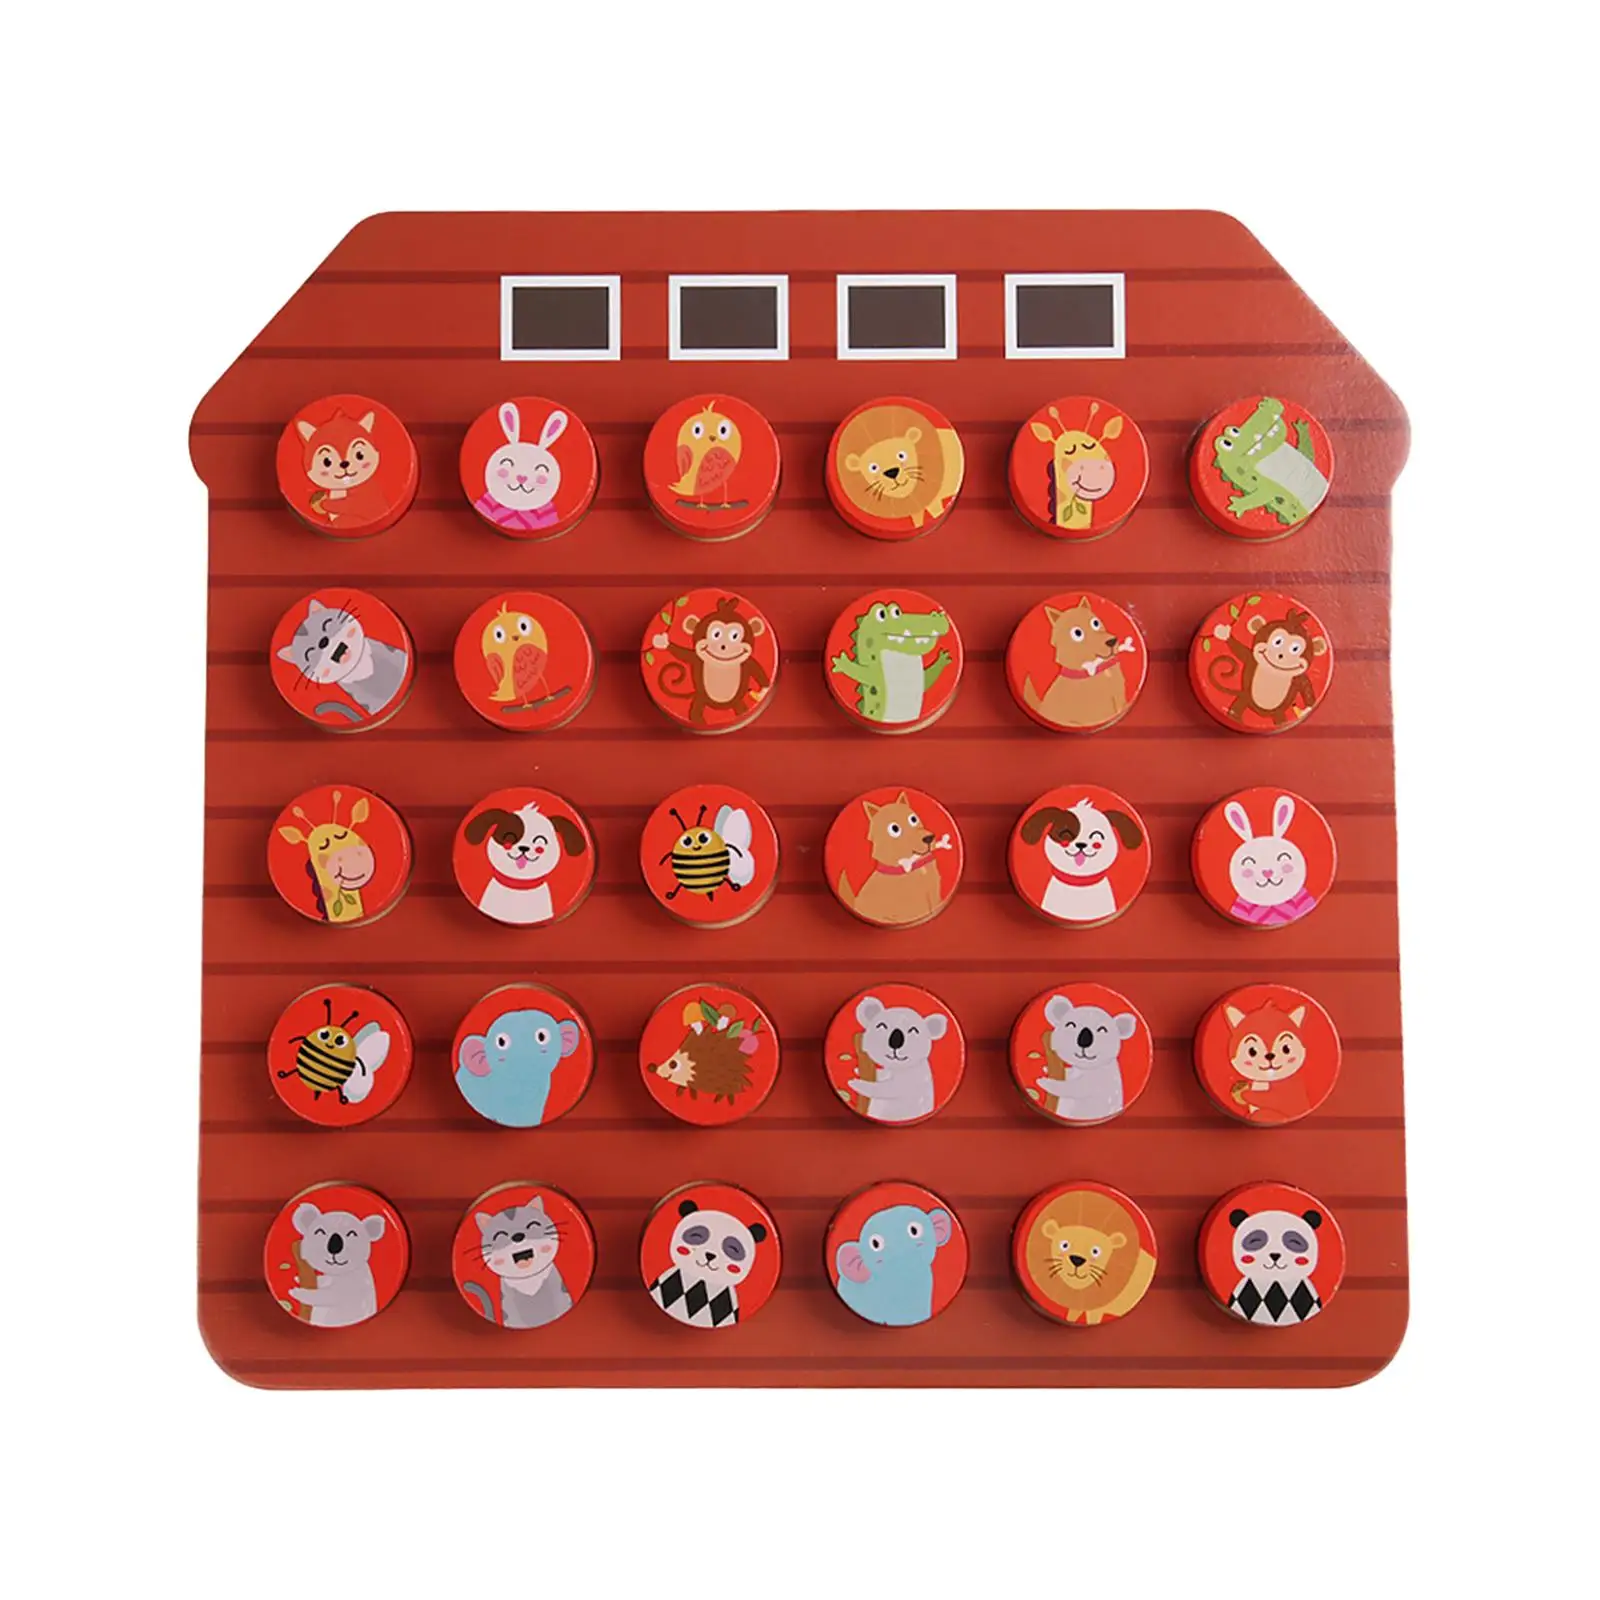 Wood Chess Board Game Montessori Logical Portable Classic Strategy Game for Birthday Kindergarten Holiday Gathering Interaction